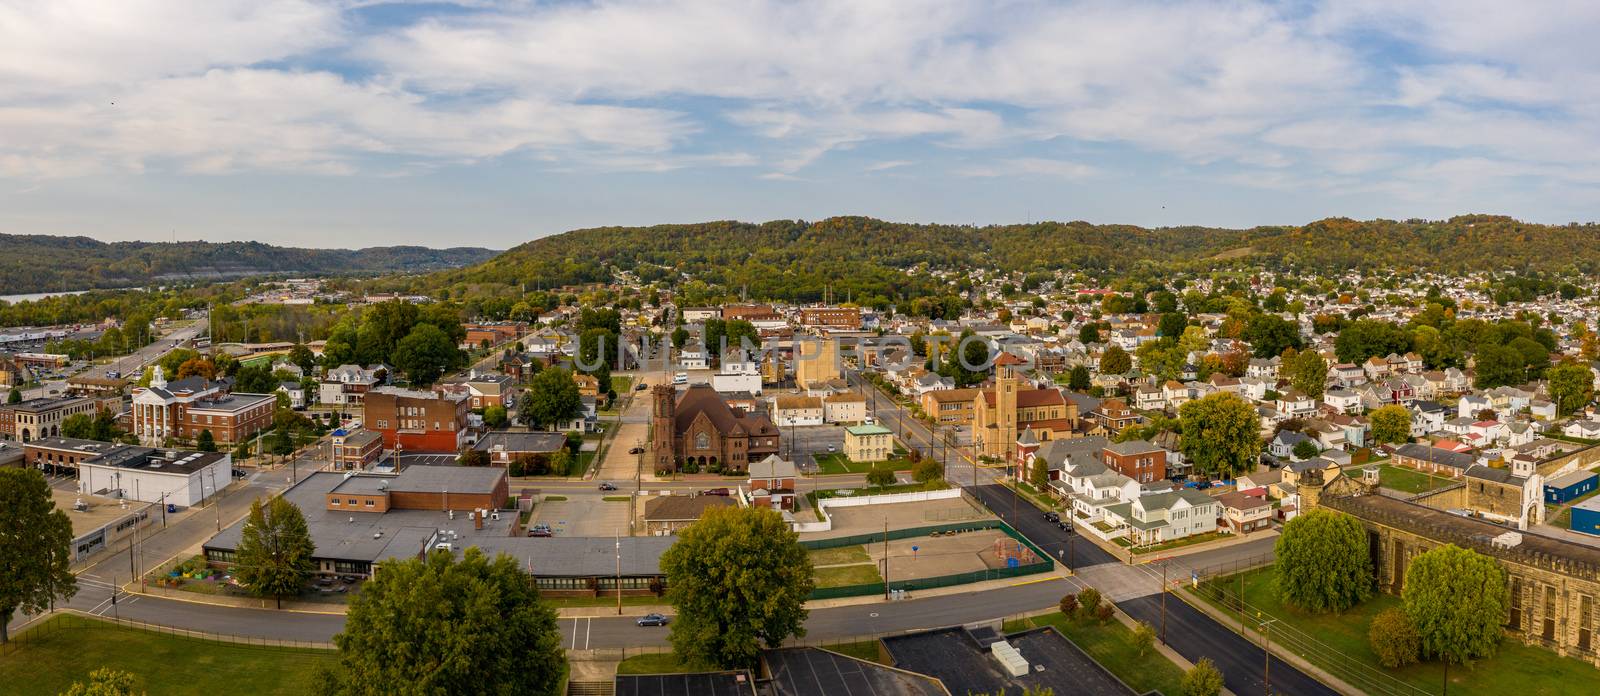 Moundsville, WV - 9 October 2020: Aerial drone panorama of the downtown area of the city in Moundsville, West Virginia